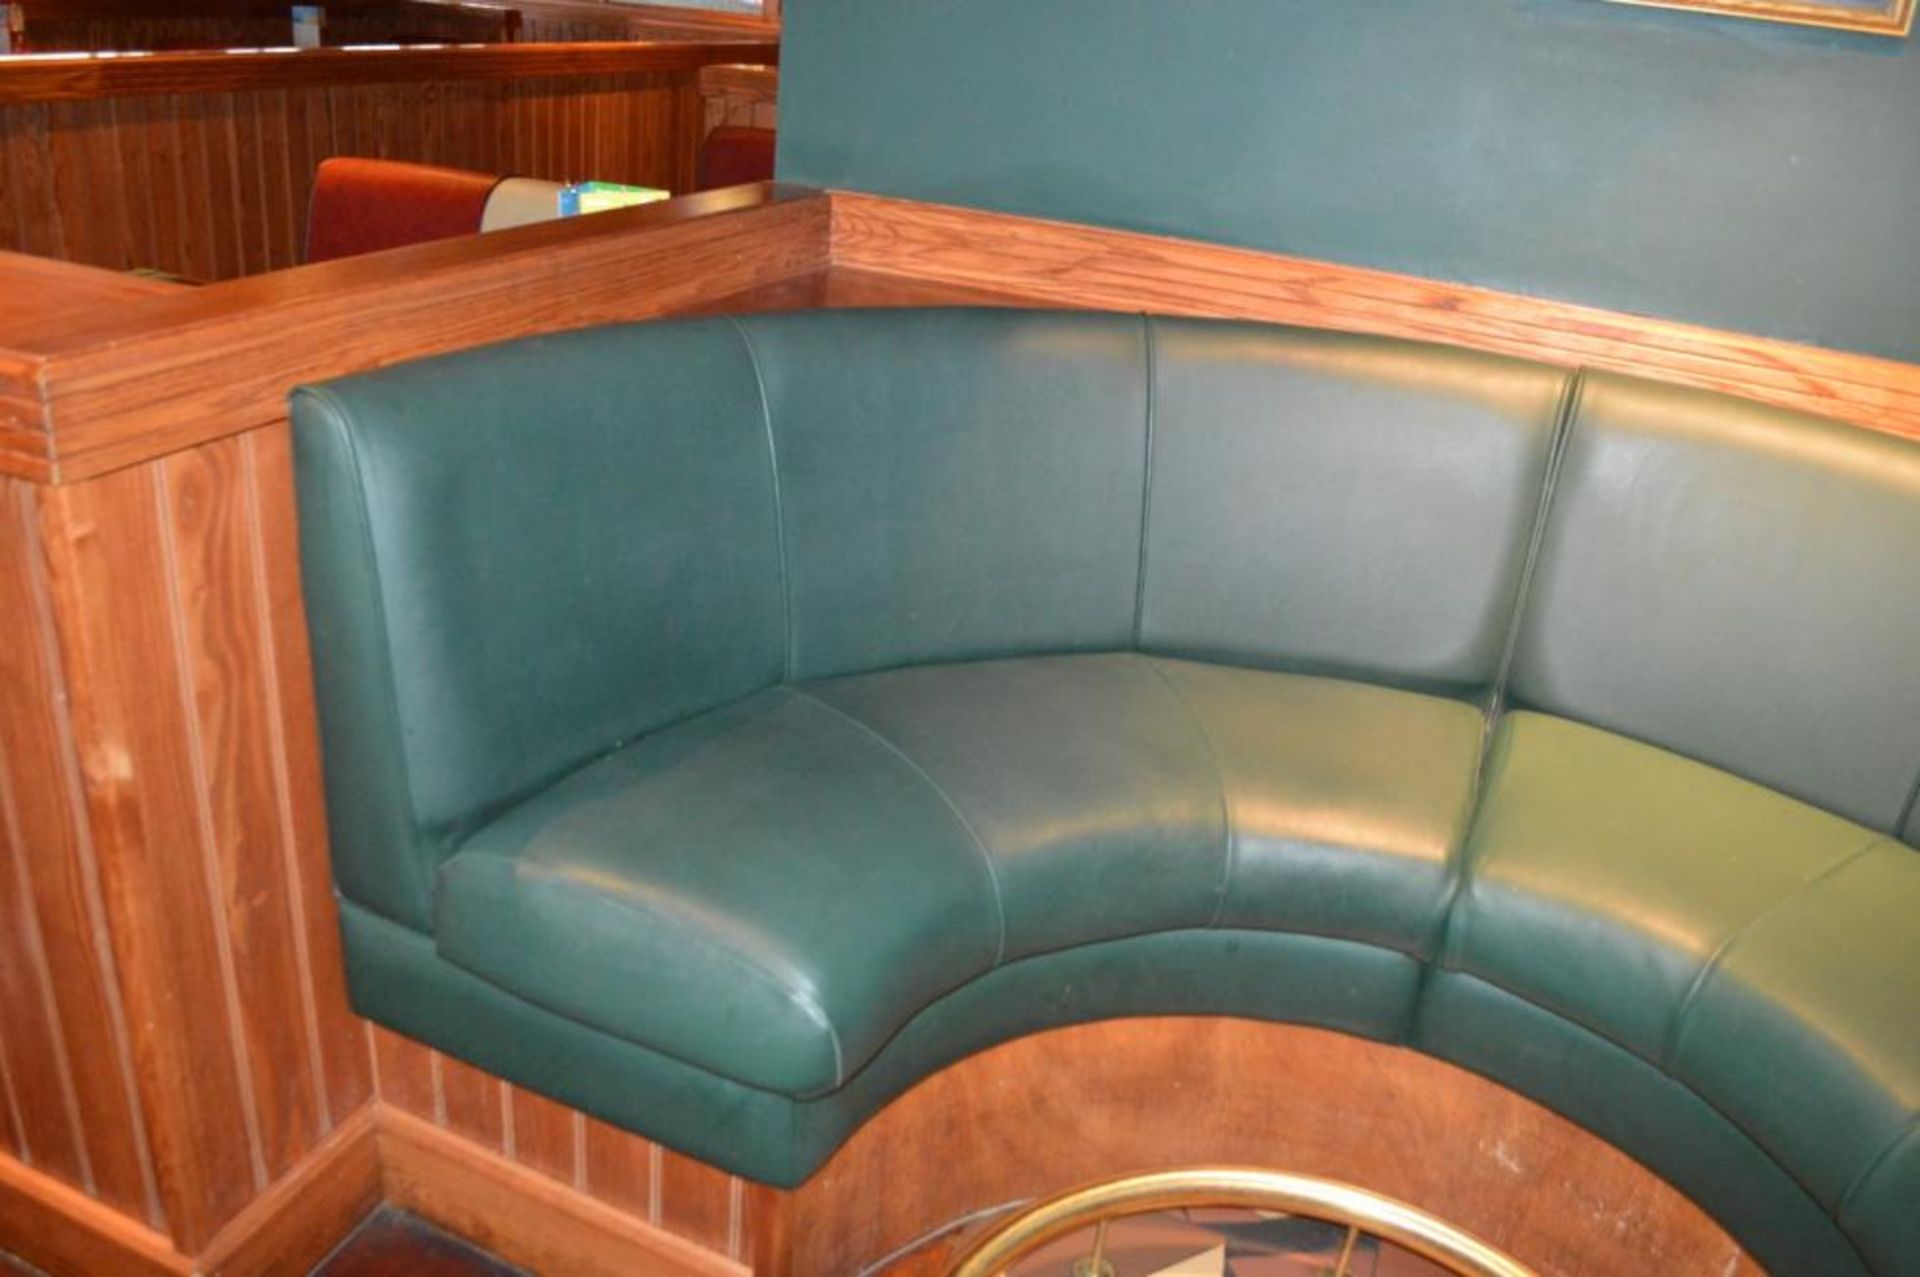 1 x Contemporary U Seating Booth With Green Faux Leather Upholstery and Brass Foot Rest - H105 x W22 - Image 2 of 5